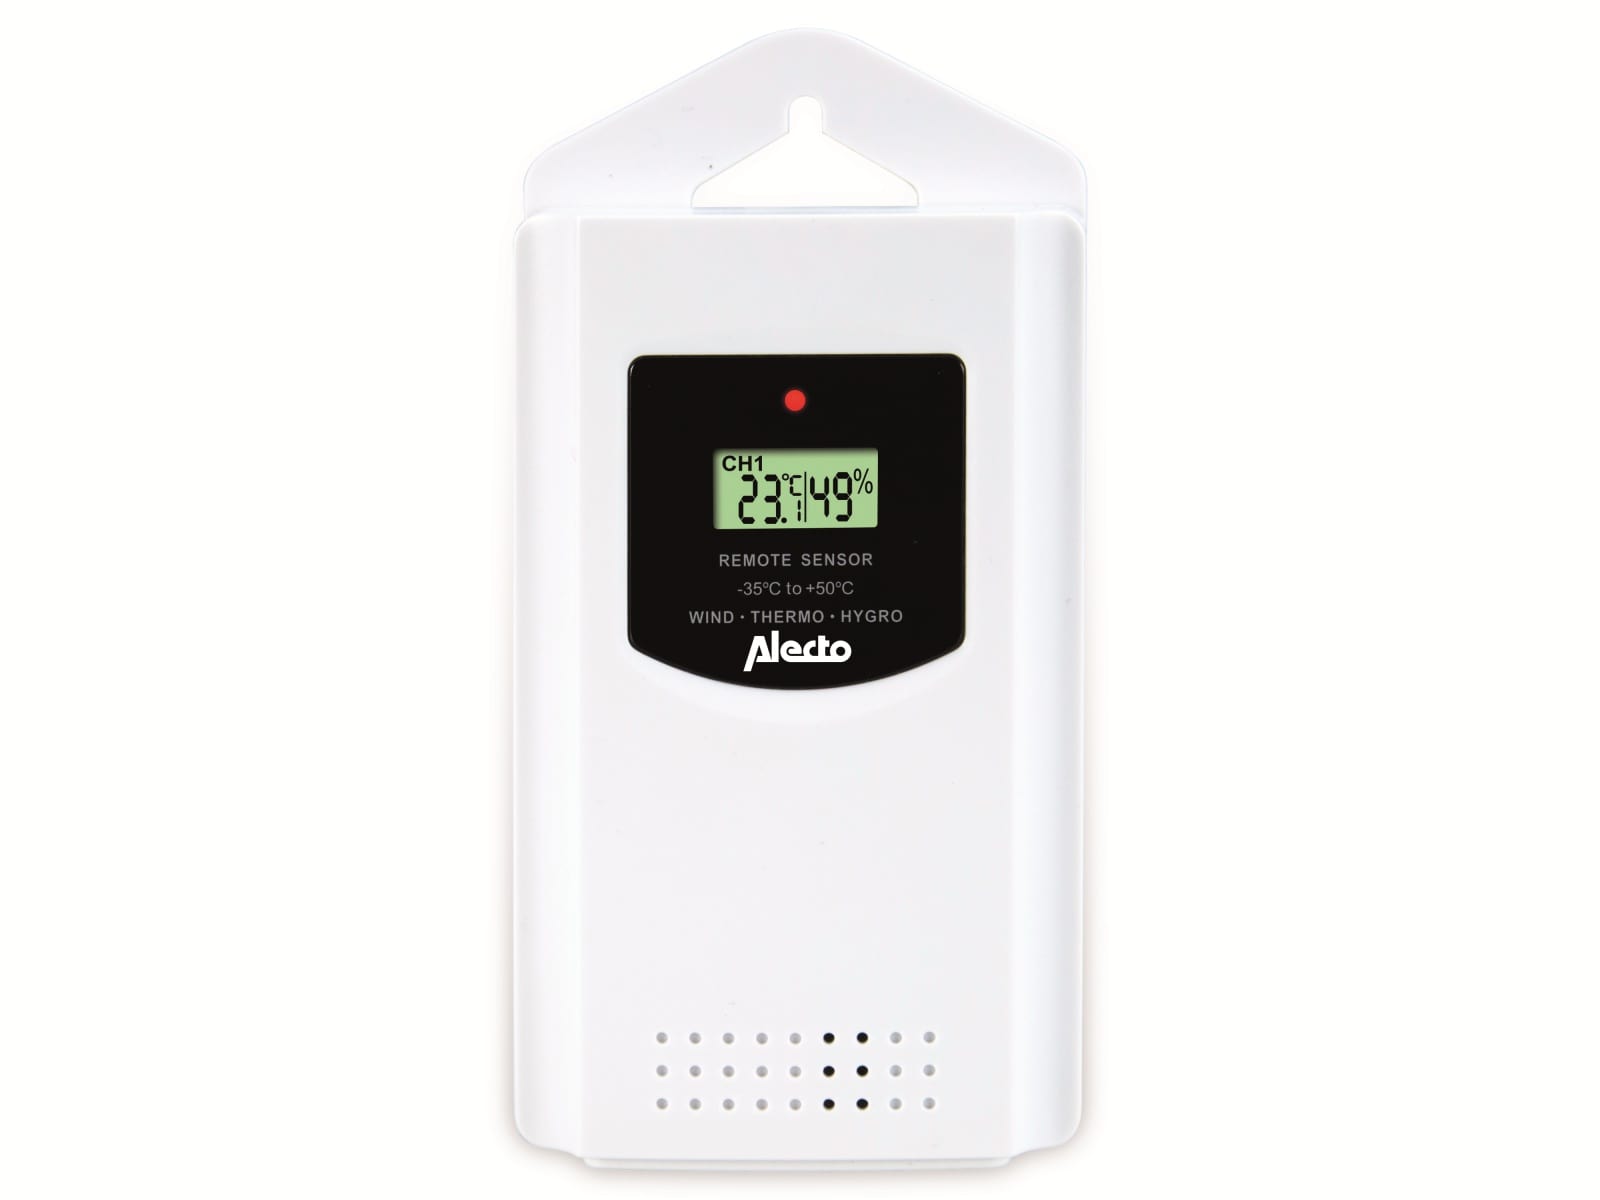 ALECTO Wetterstation WS-3300